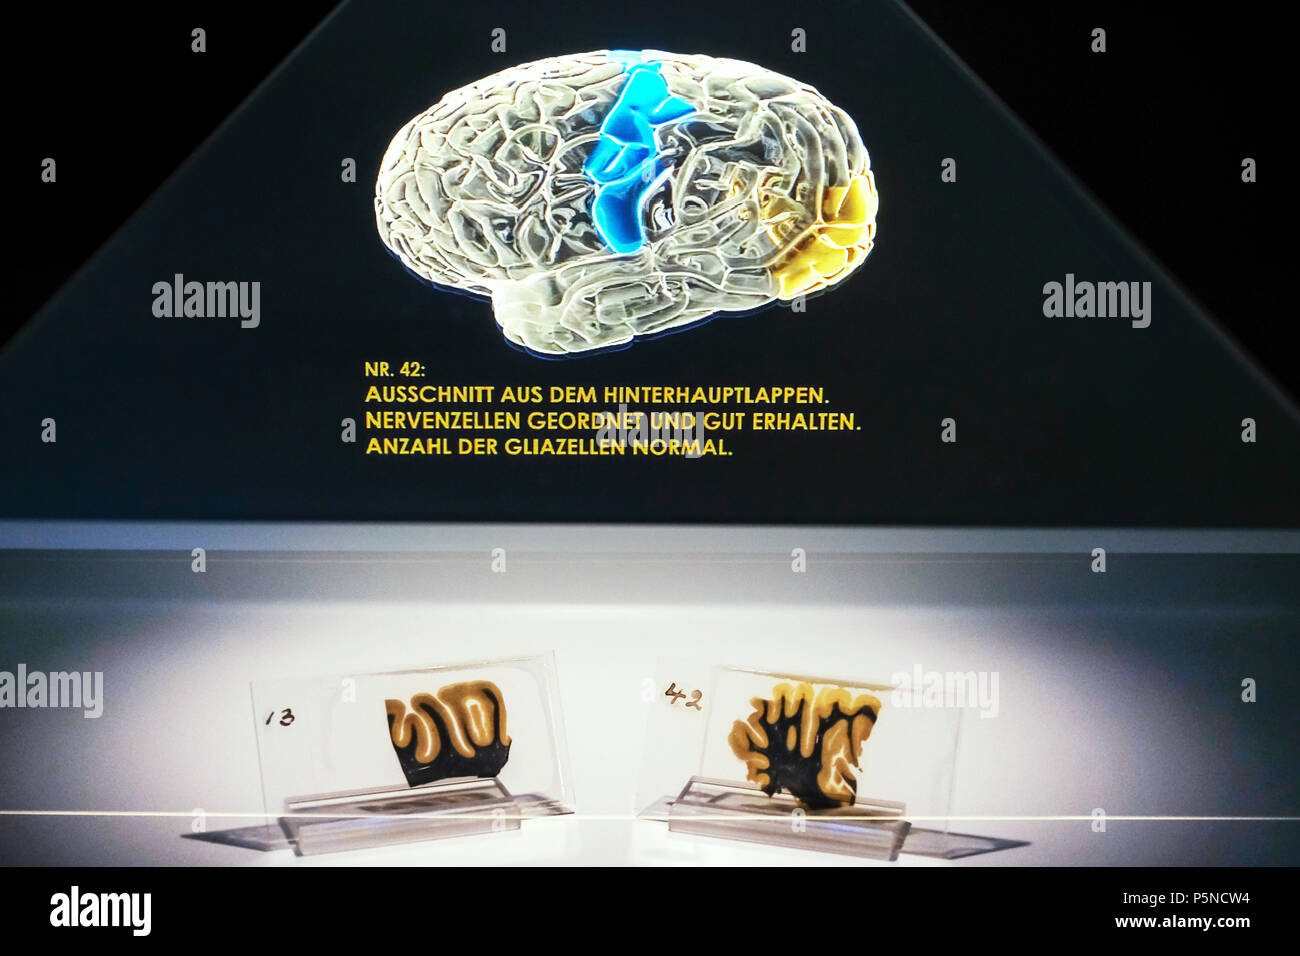 Two histological sections from the brain of Albert Einstein (1879-1955) below and a three-dimensional hologram of his brain shown in the exhibition 'The Brain - Intelligence, Awareness, Feeling' in the LWL Museum of Natural History, Münster, Germany, Jujy 2018 (Lender: Mütter Museum, Philadelphie) Stock Photo